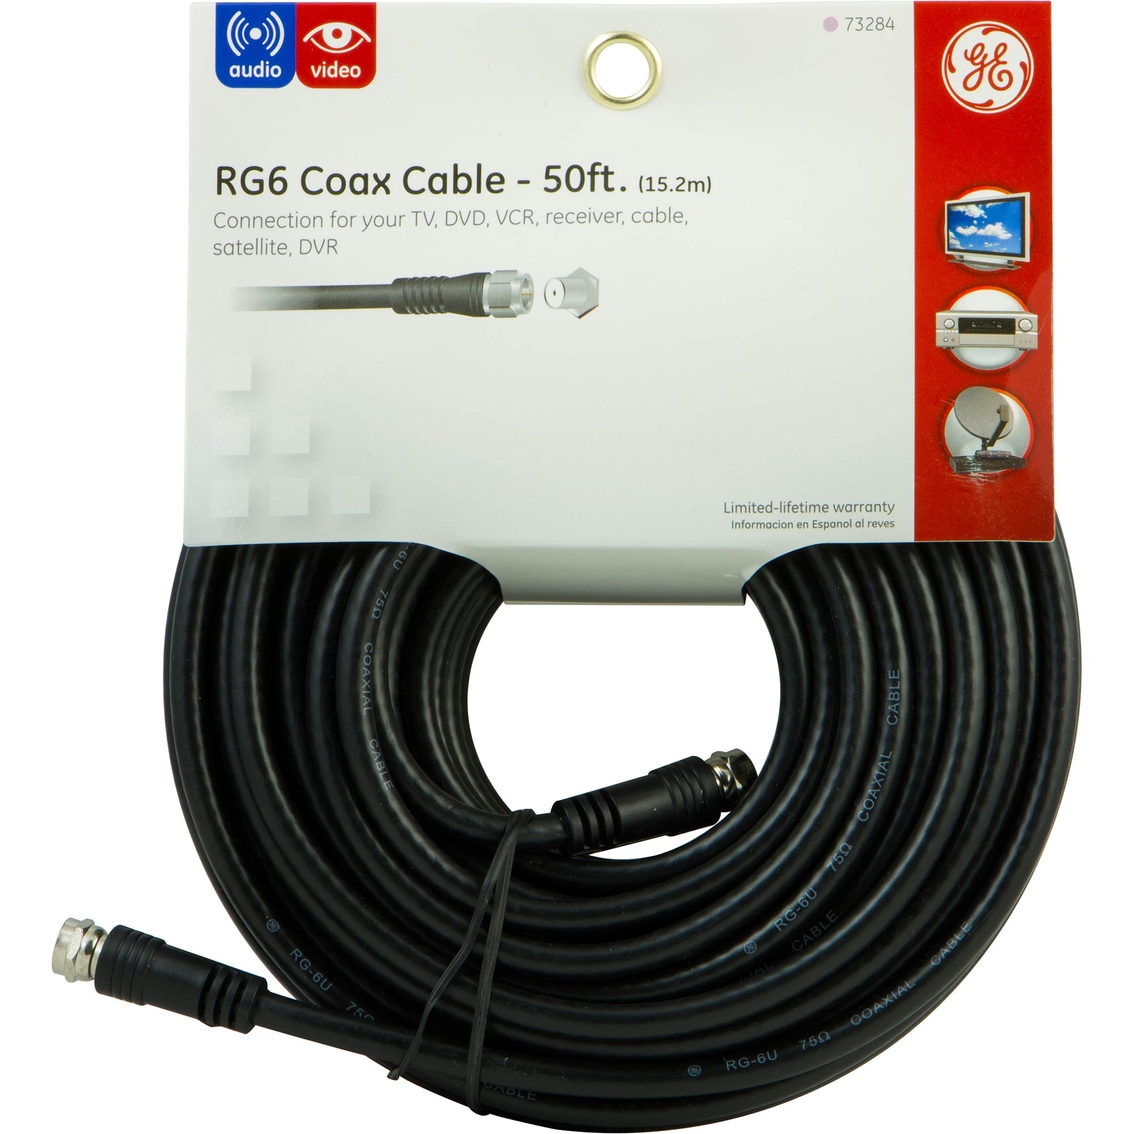 GE 50 ft. RG6 Coax Cable - Image 2 of 2